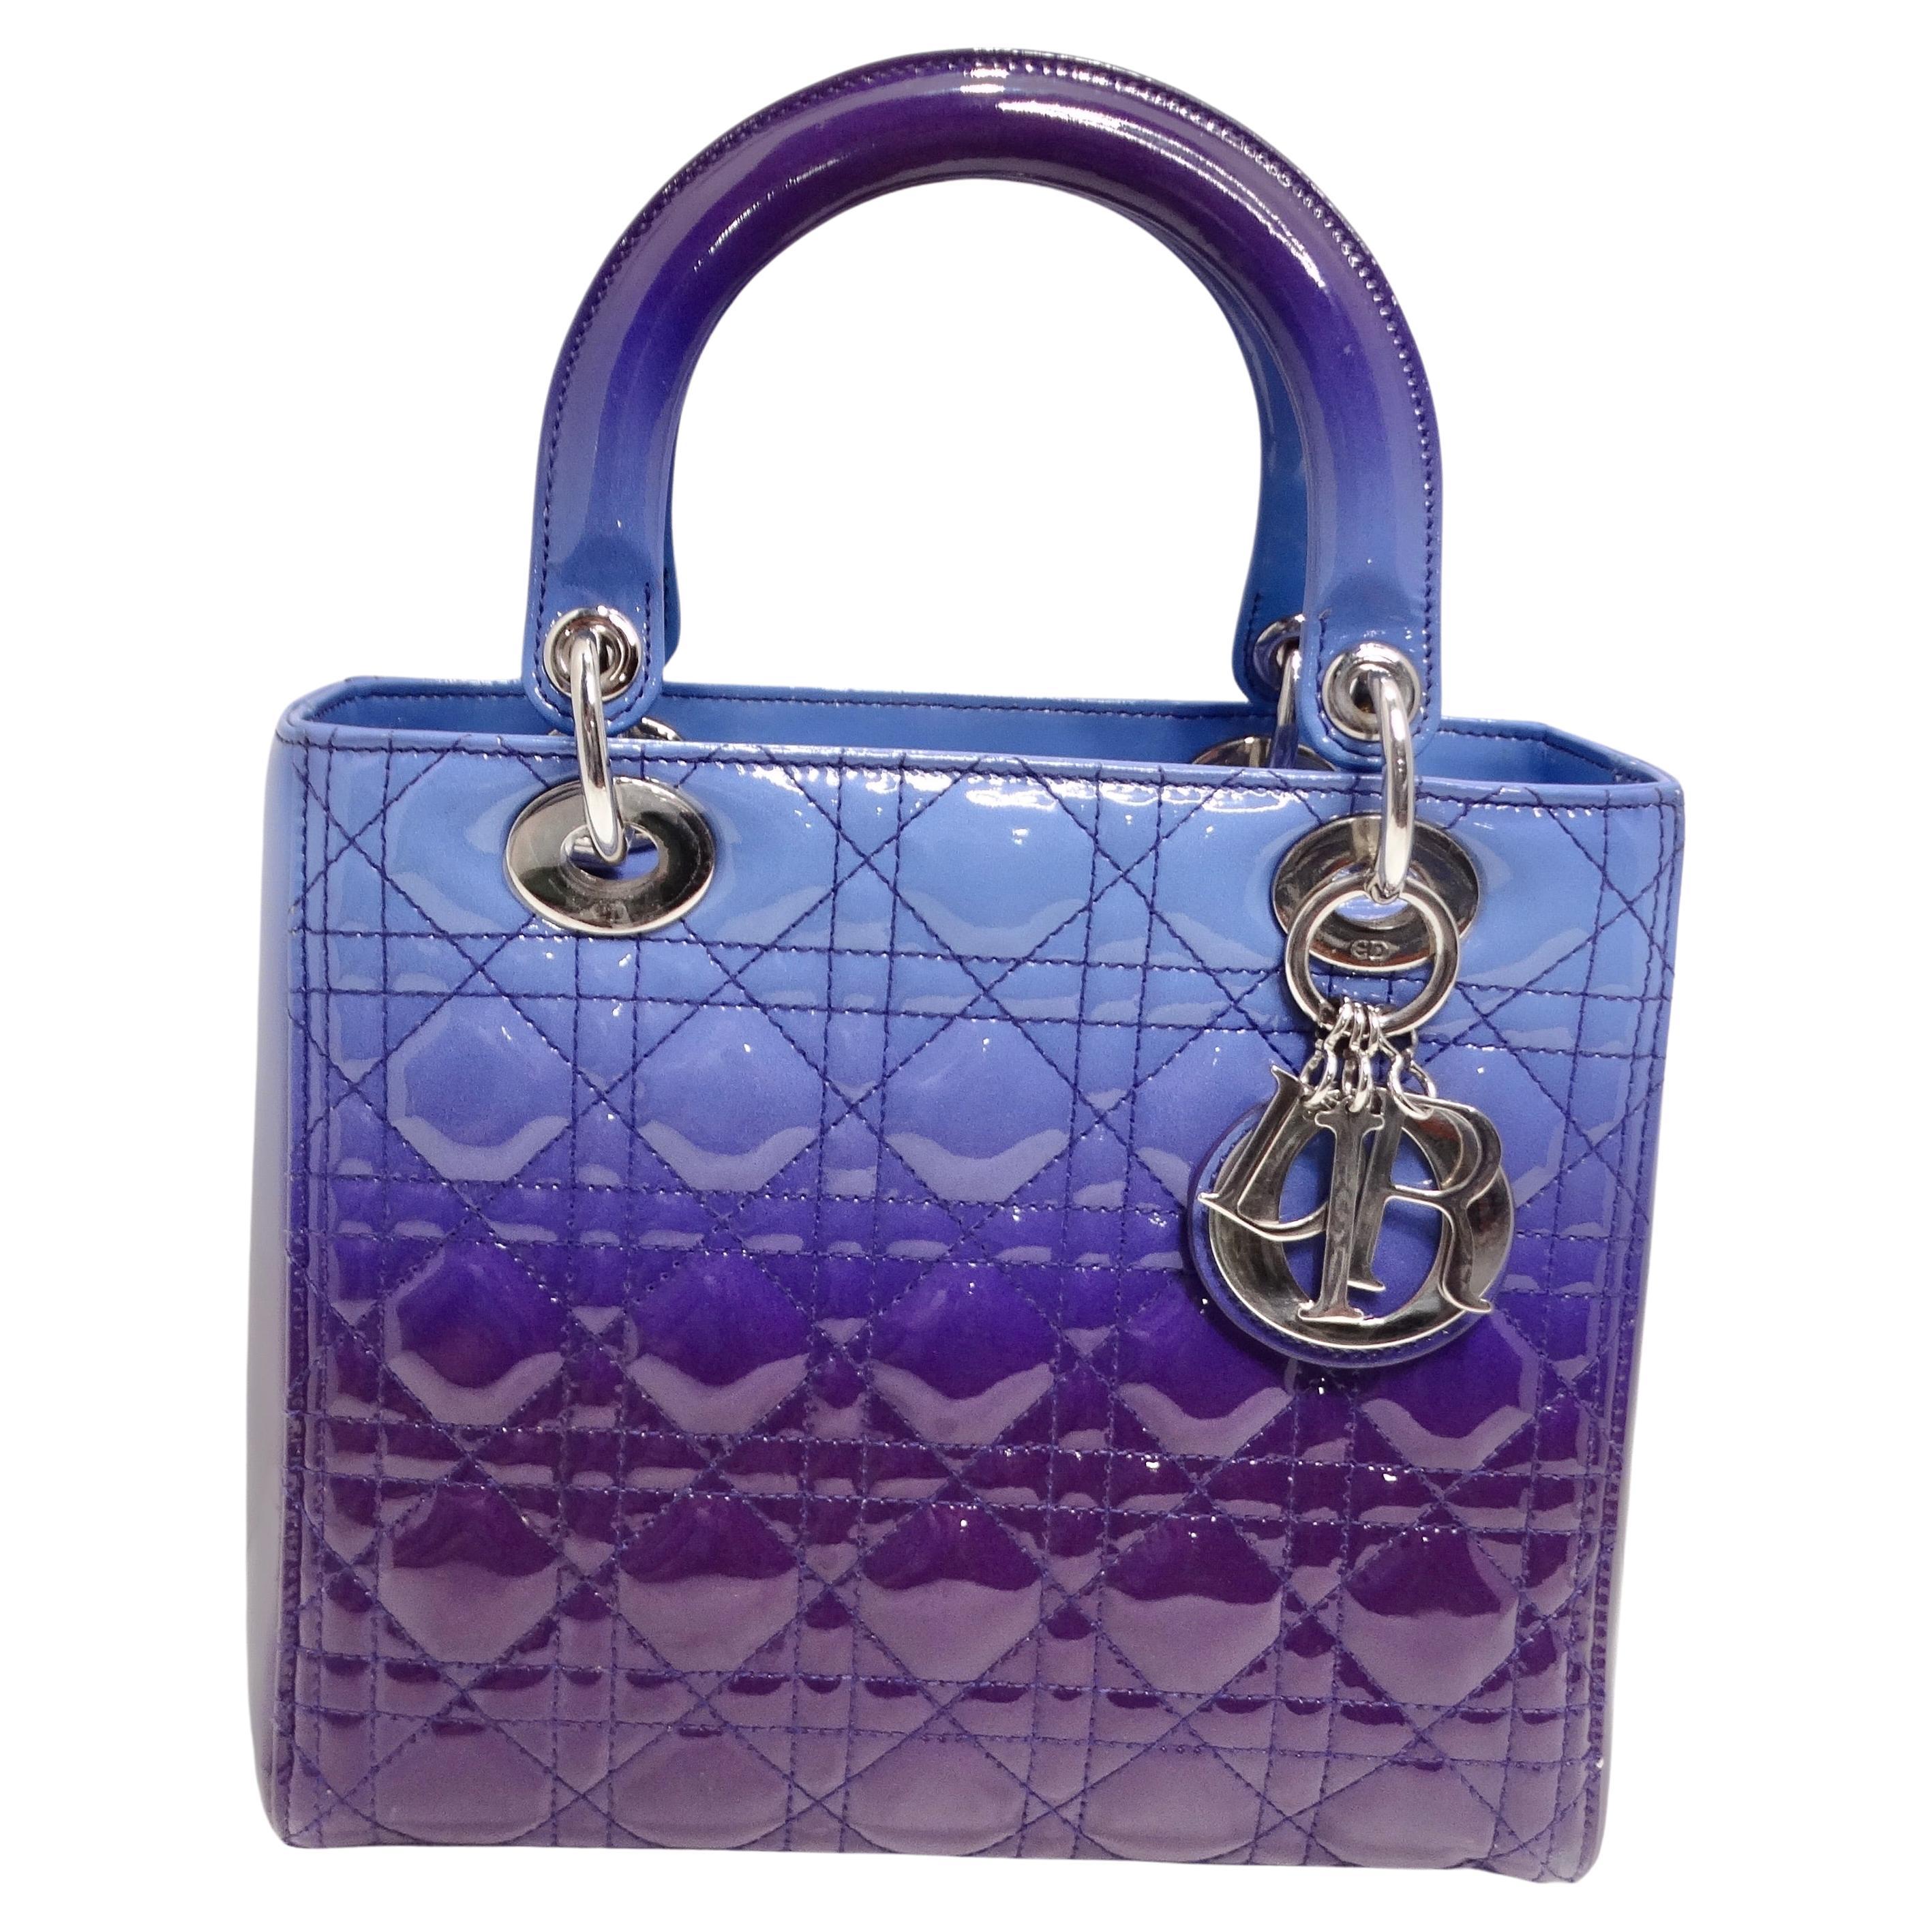 Christian Dior Patent Cannage Gradient Medium Lady Dior Purple Blue In Excellent Condition For Sale In Scottsdale, AZ